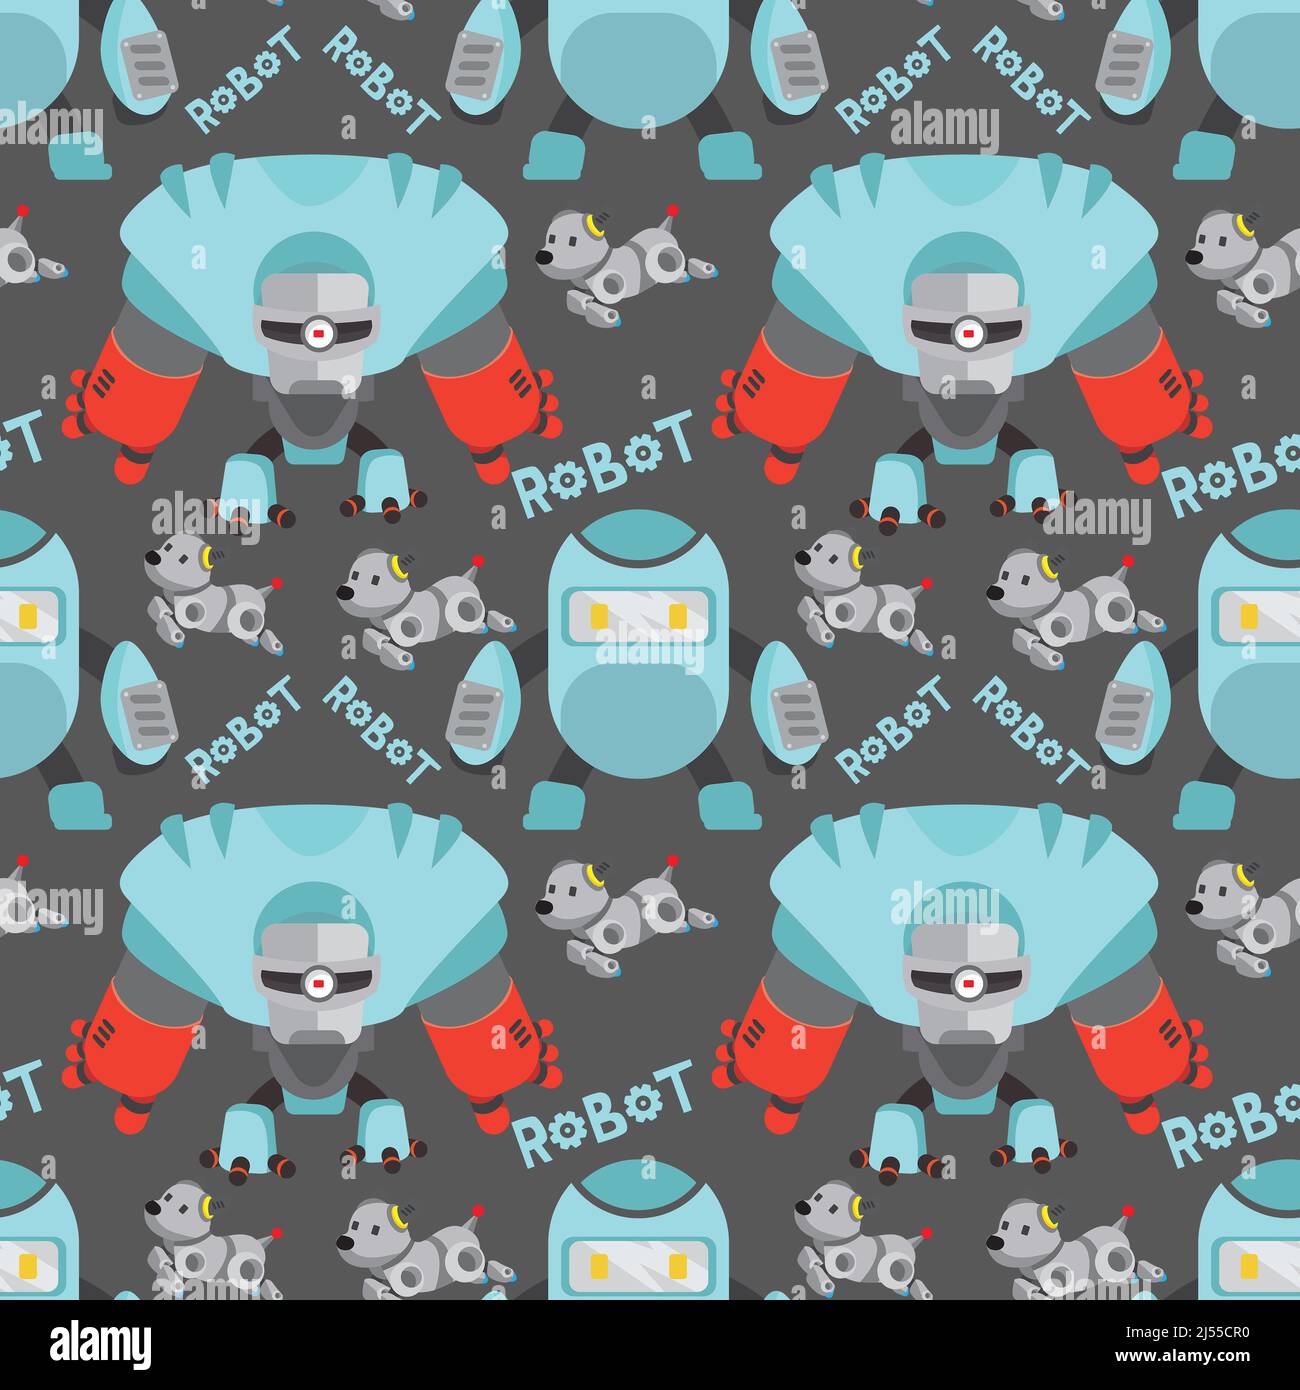 Aqua robot seamless pattern with puppy gray background design element. Stock Photo